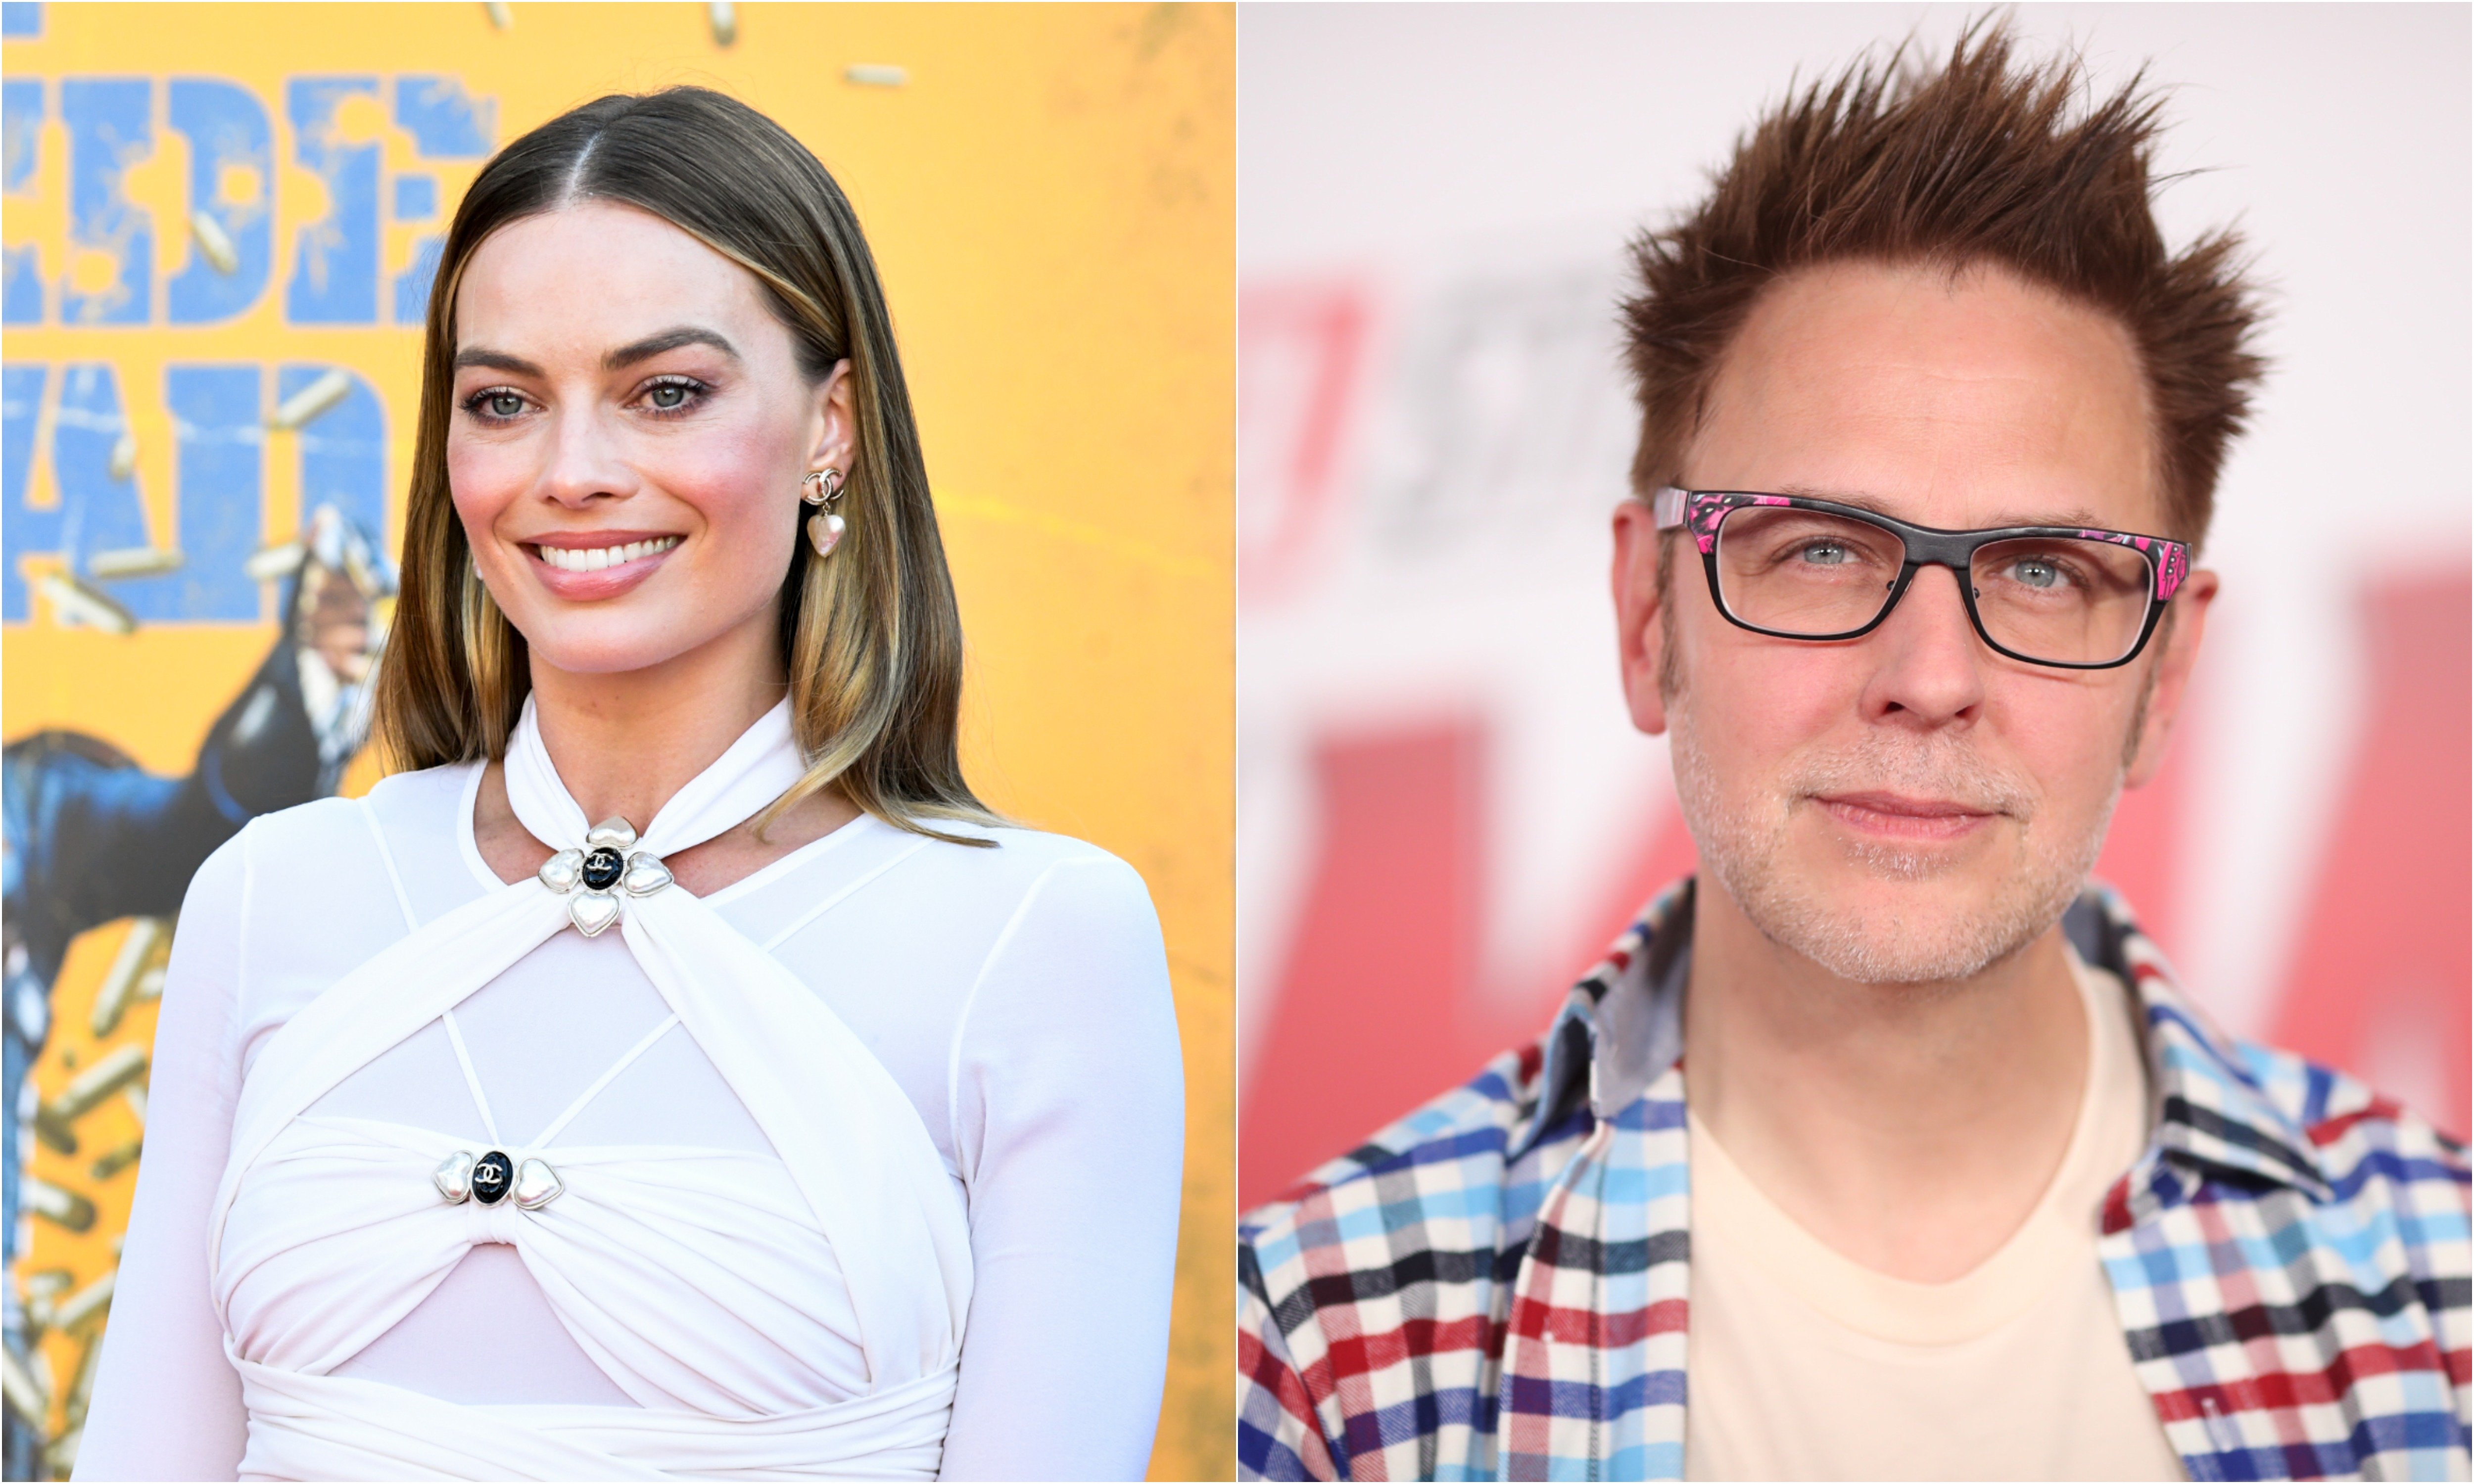 A joined photo of Margot Robbie at 'The Suicide Squad' premiere and director James Gunn at the 'Ant-Man And The Wasp' premiere